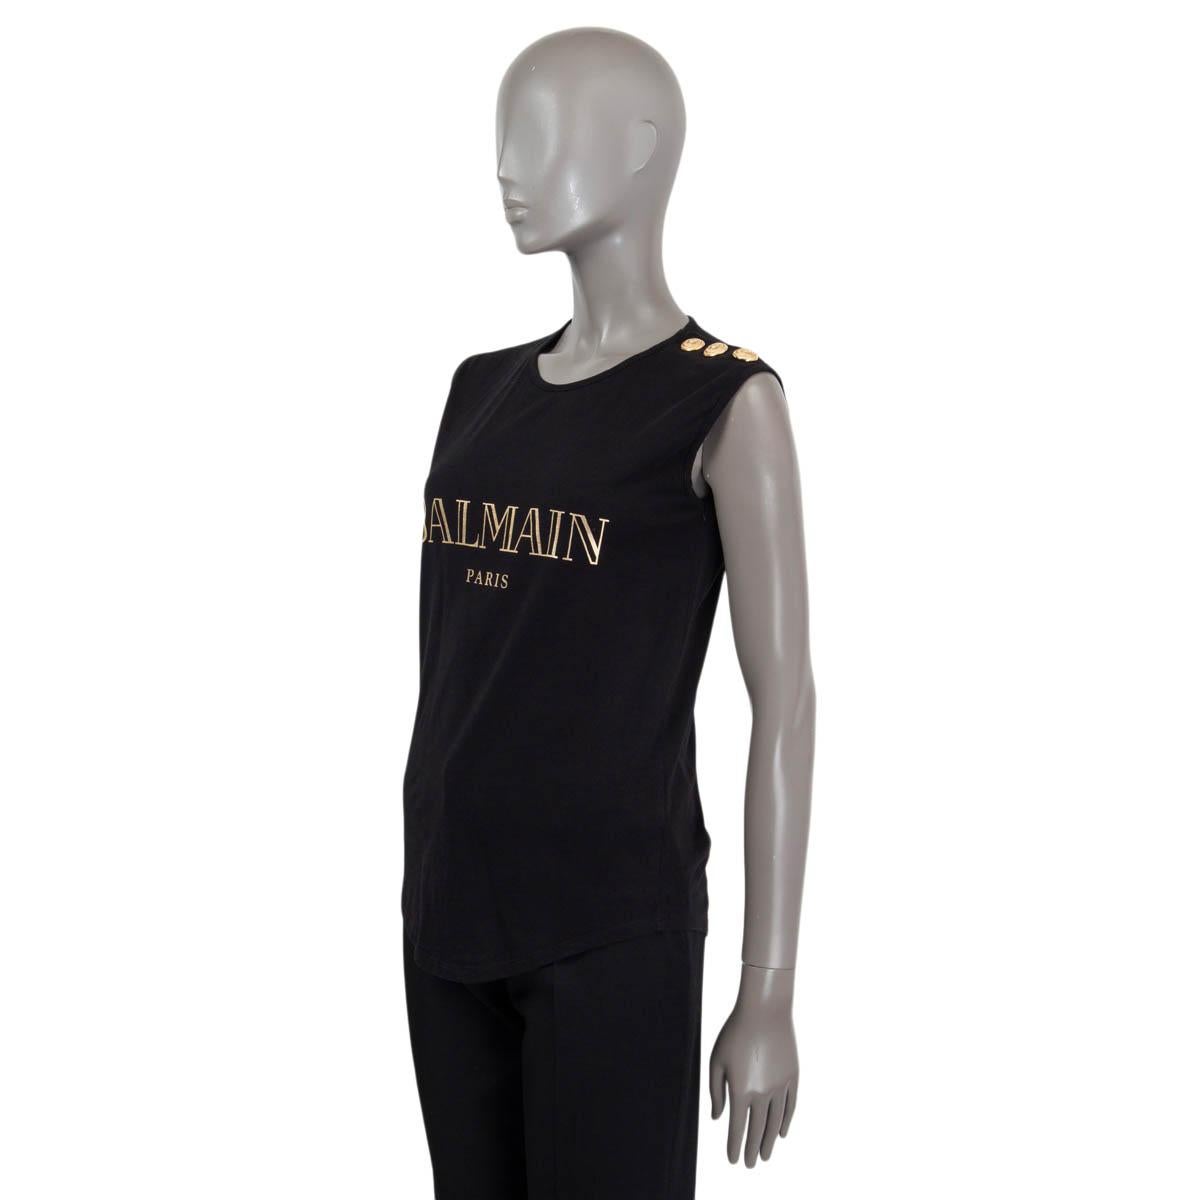 BALMAIN black cotton LOGO BUTTONED NECK Tank Top Shirt 36 XS In Excellent Condition For Sale In Zürich, CH